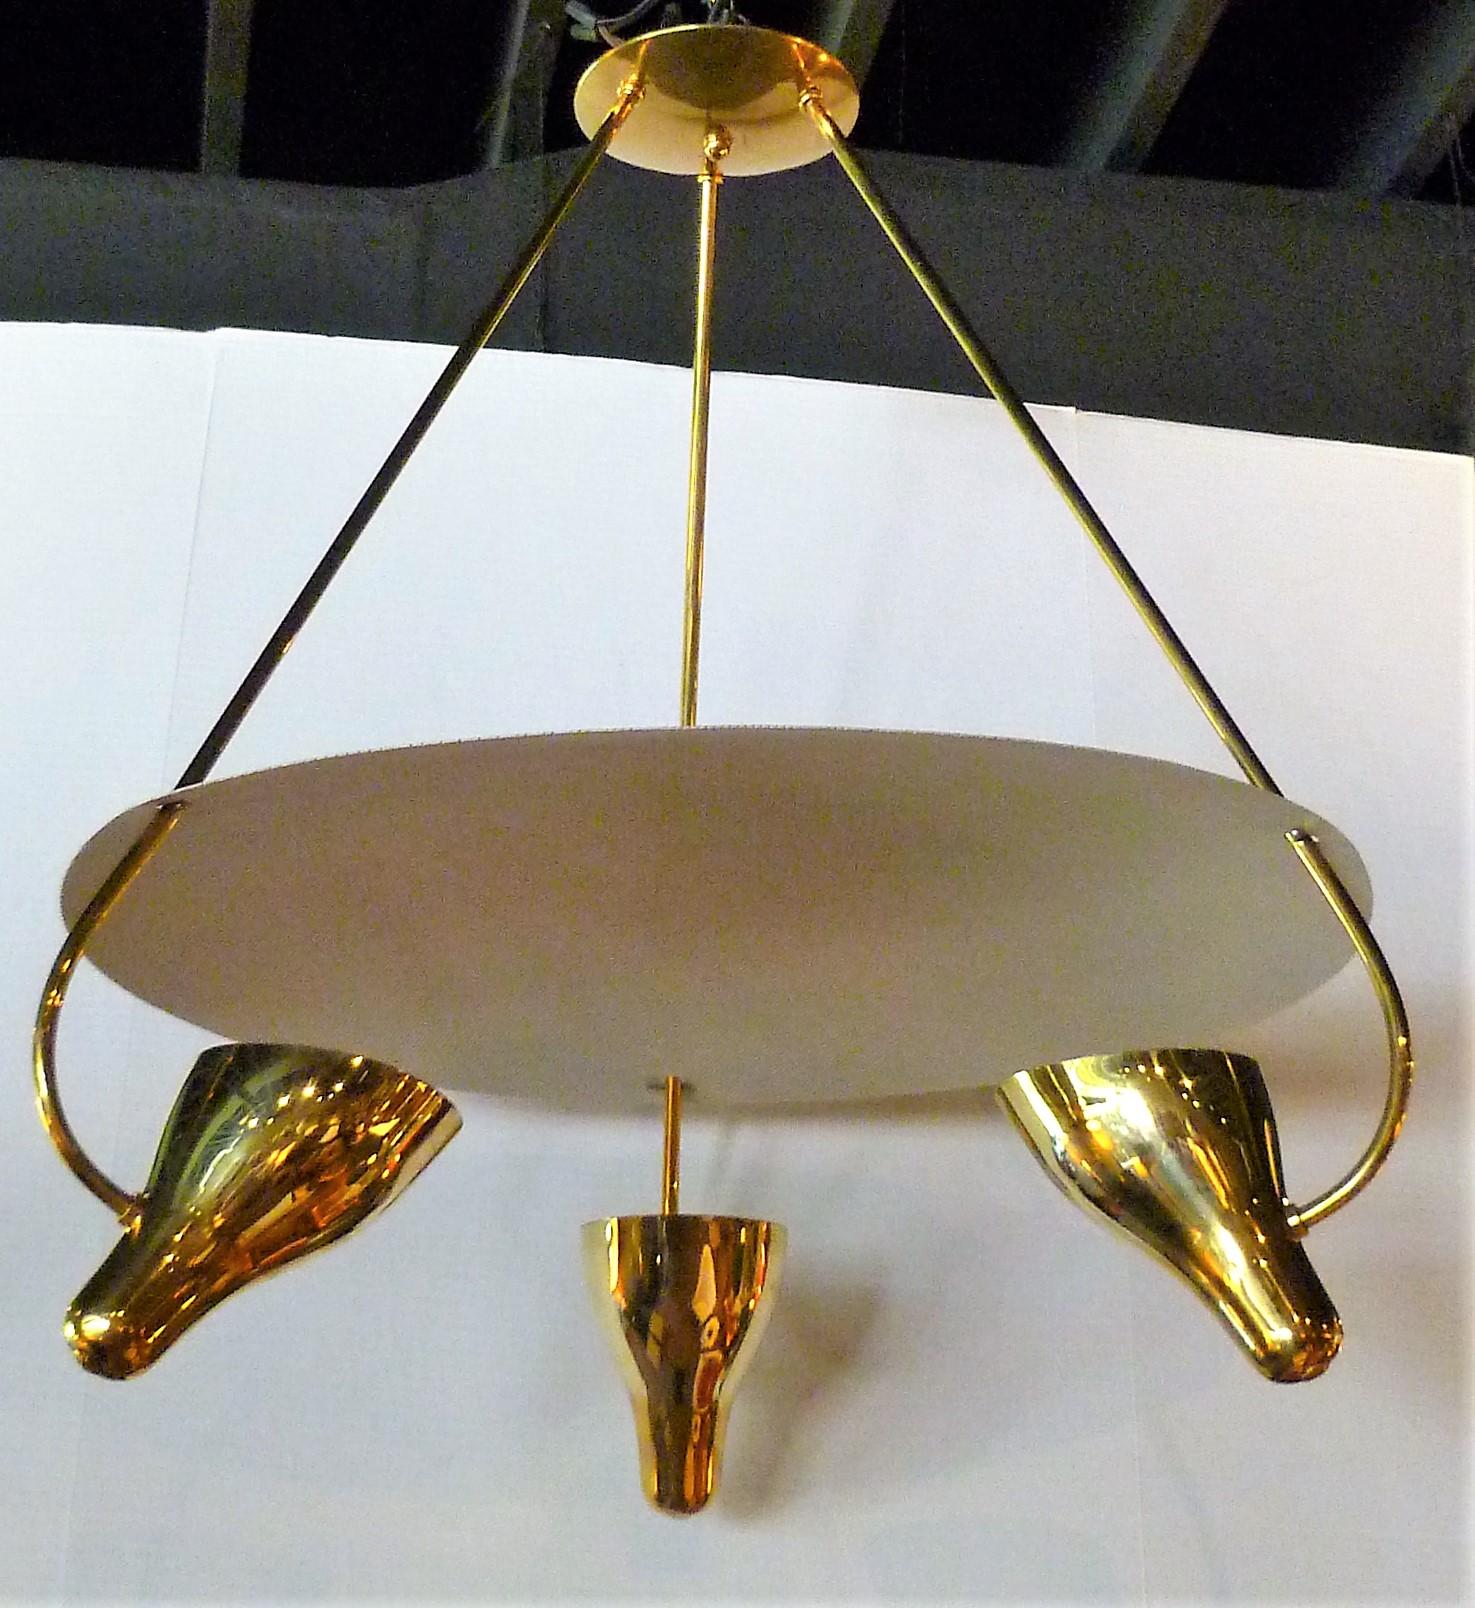 An inspired design by Gerald Thurston and produced by Lightolier, this chandelier uses reflection as a means of light with it's three brass cones that pierce a curving powder-coated metal canopy above them, their up beams of light radiating down